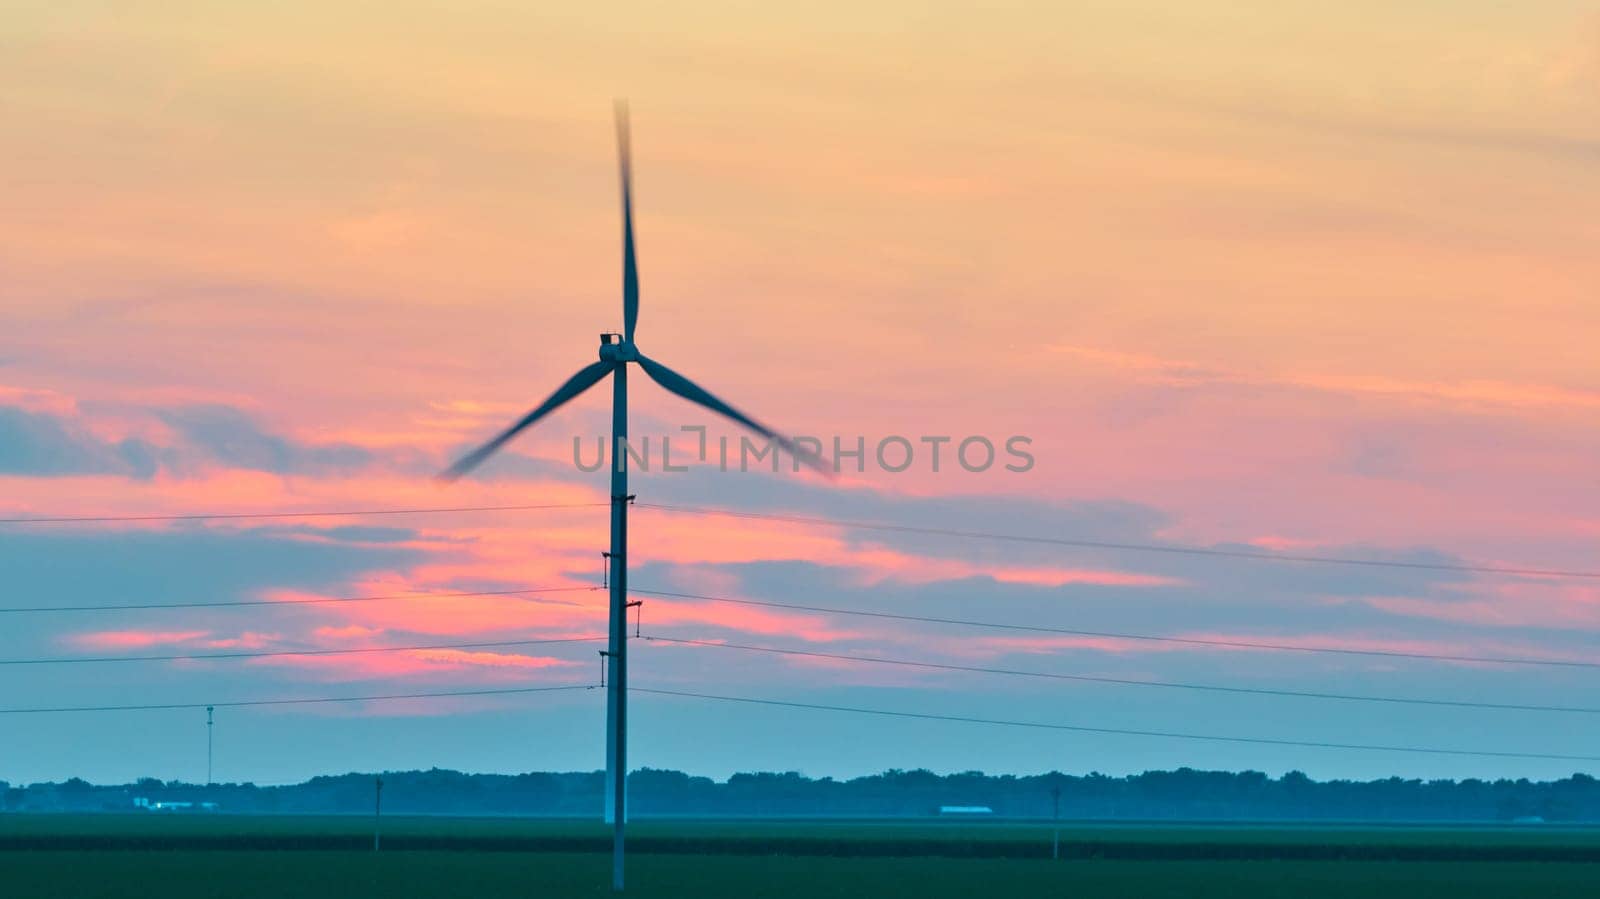 Aerial spinning wind turbine at dusk with pink and blue clouds by njproductions